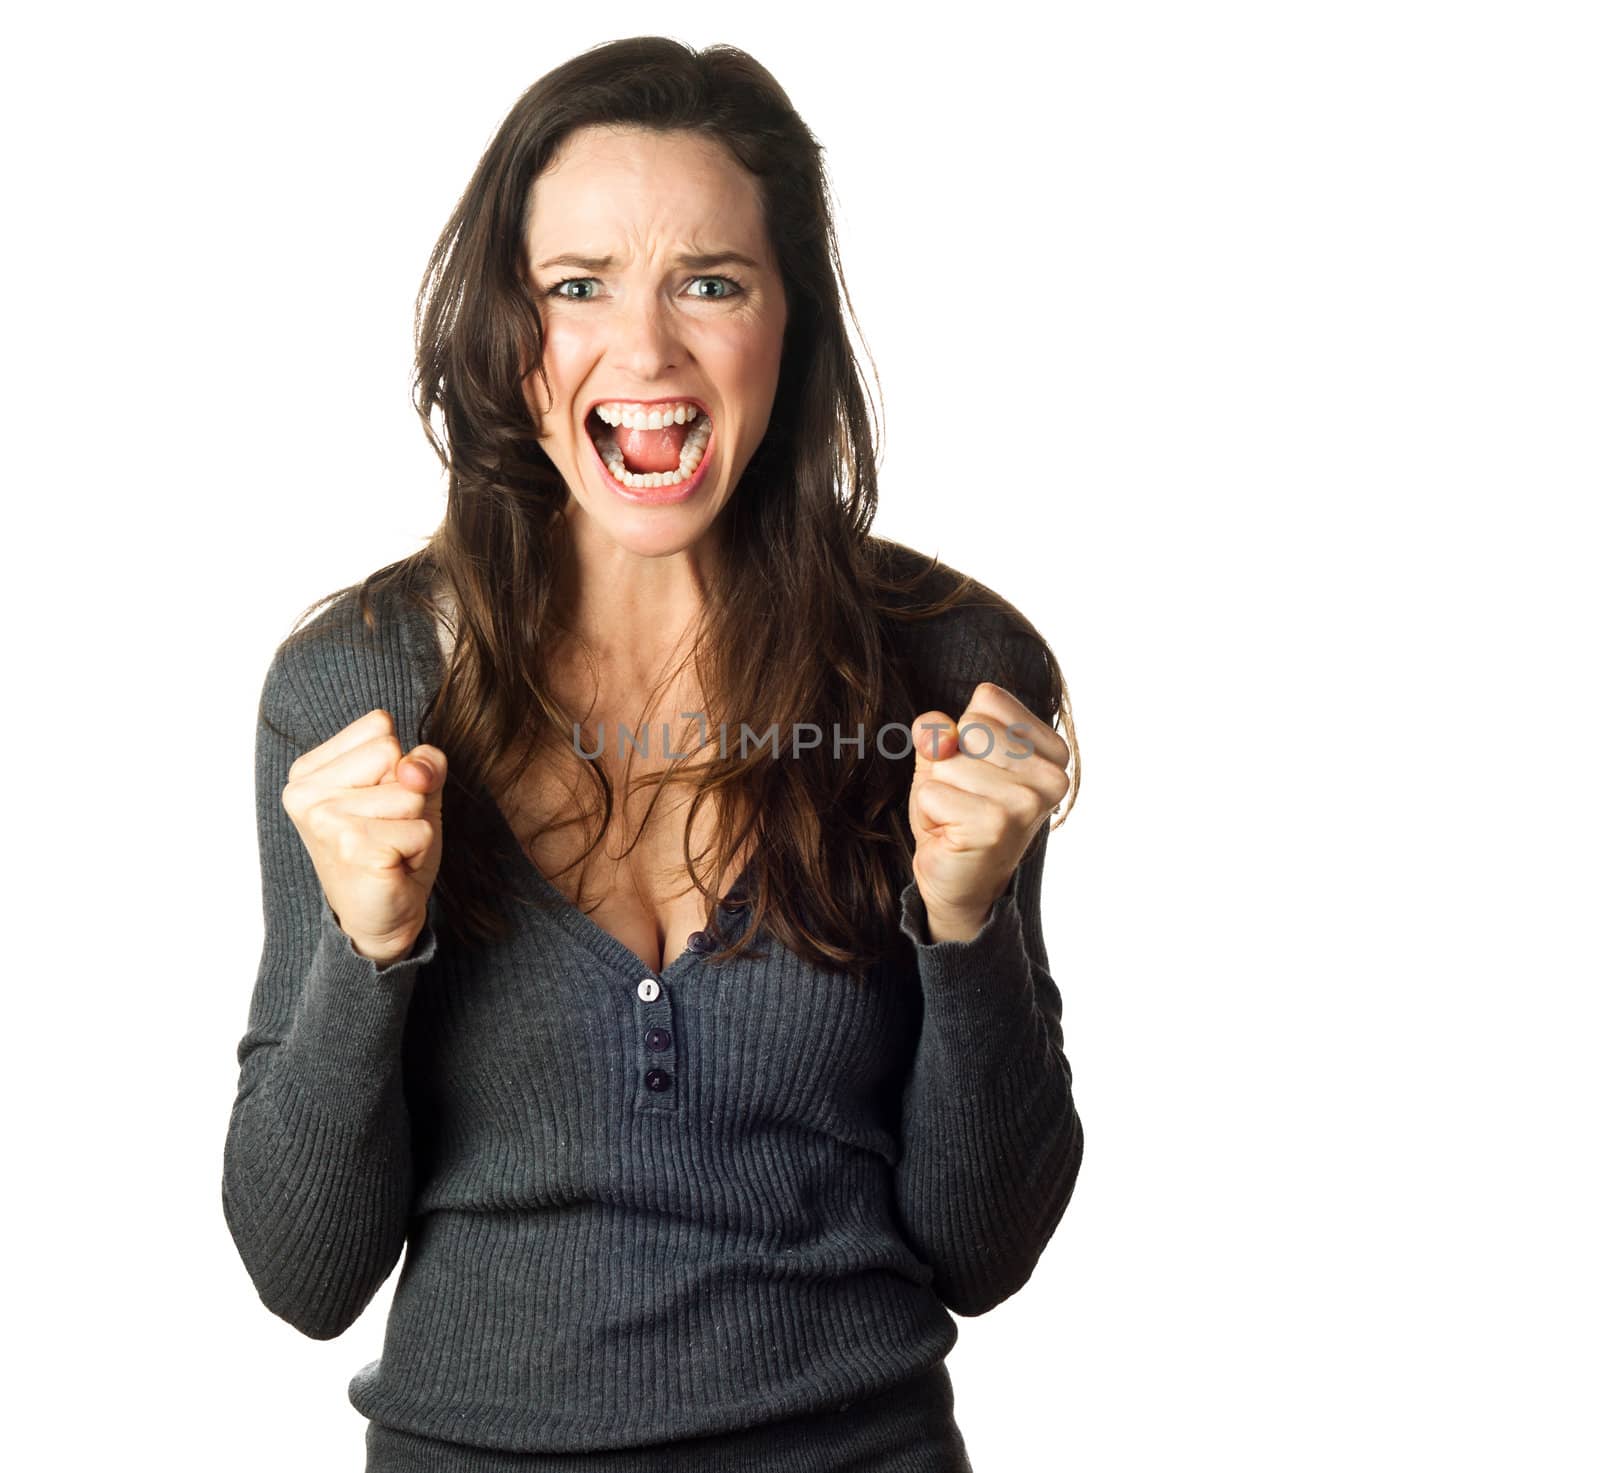 Isolated portrait of a very angry, frustrated and upset young woman.